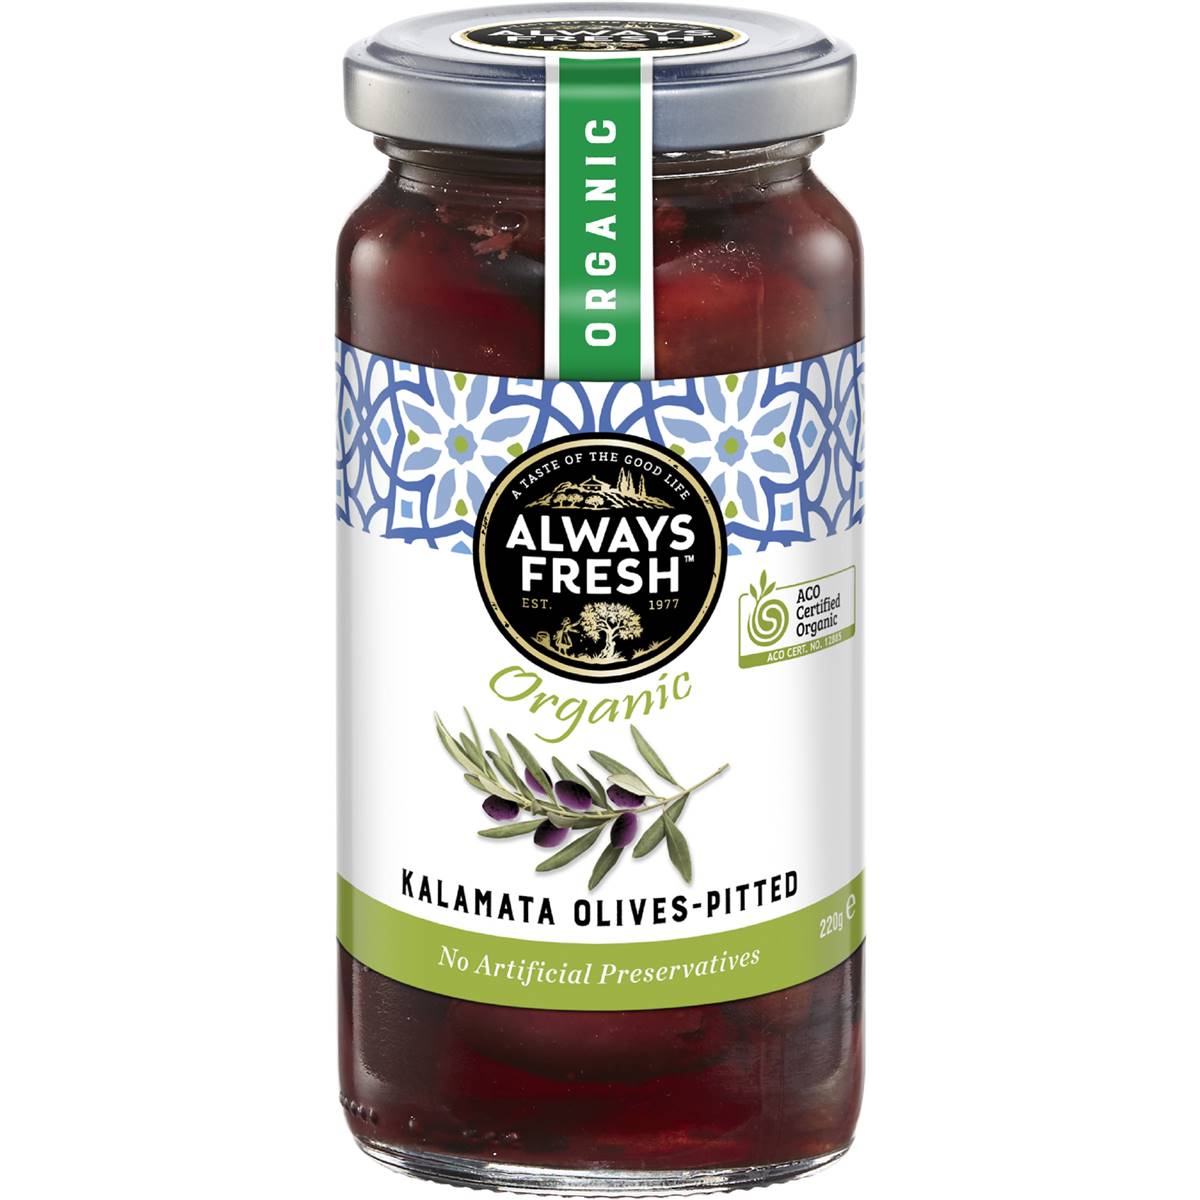 Calories in Always Fresh Organic Kalamata Pitted Olives